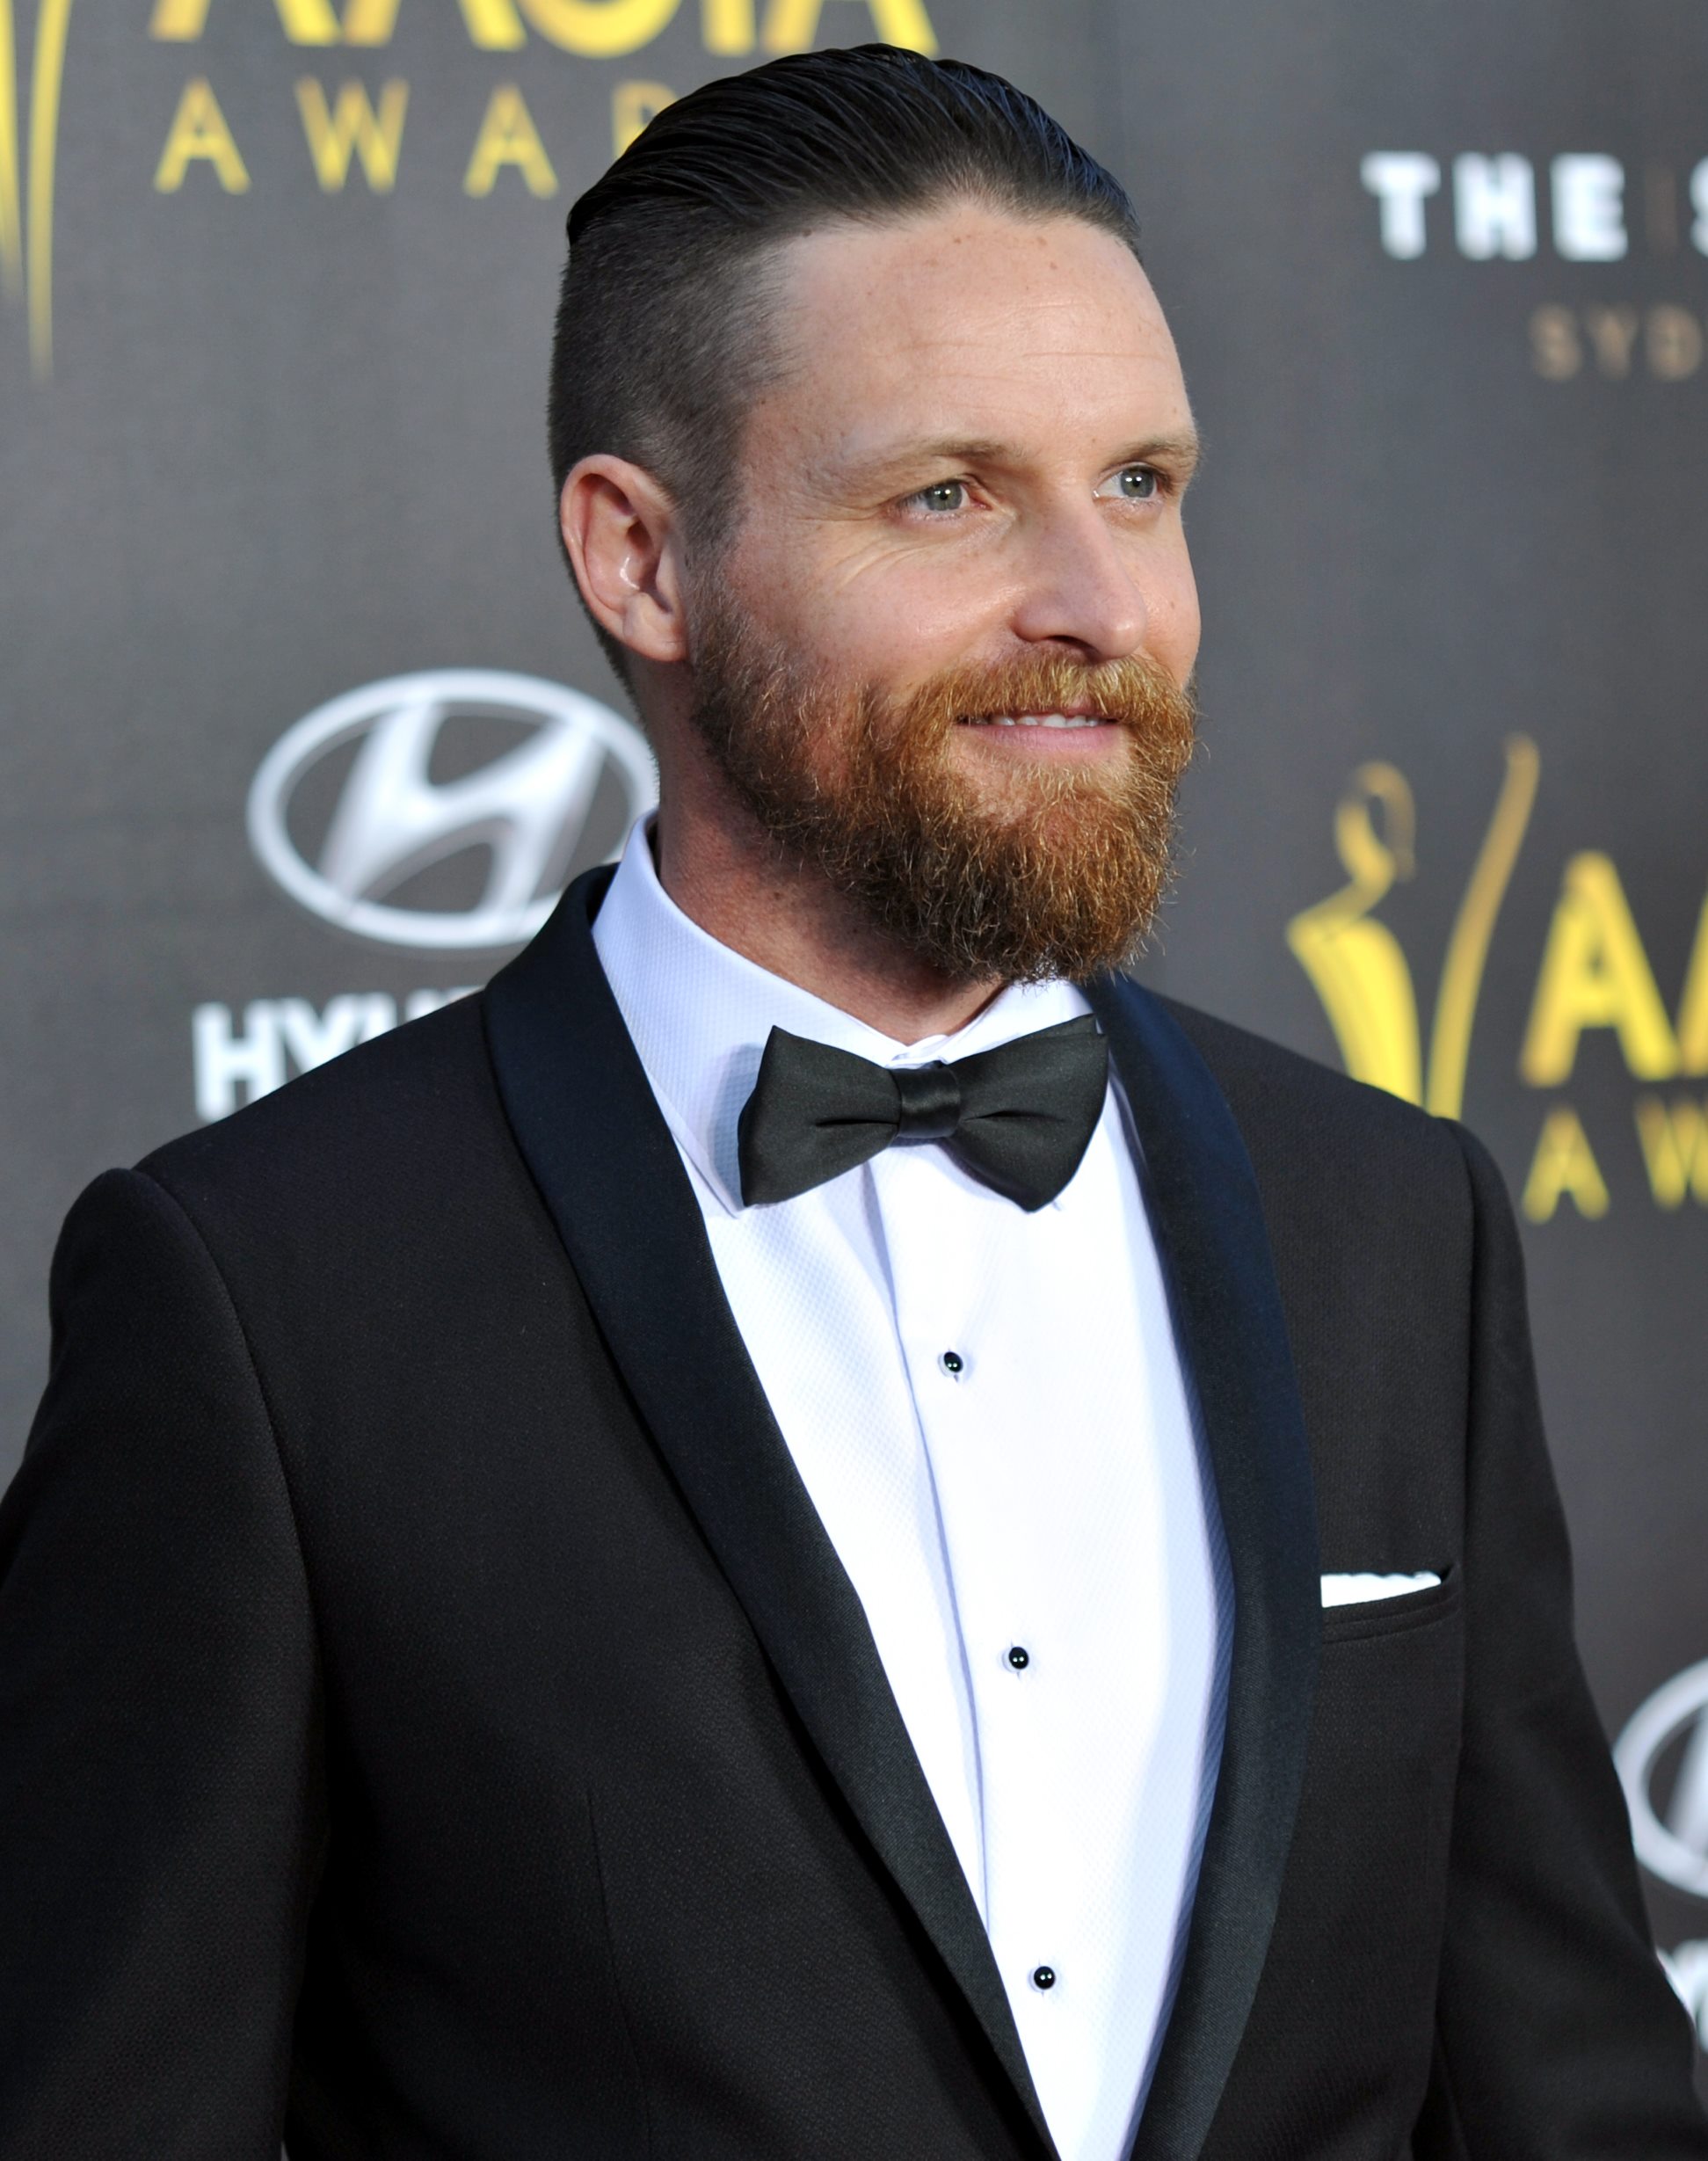 Daniel Findlay on the red carpet at the 2015 AACTA Awards in Sydney, Australia.